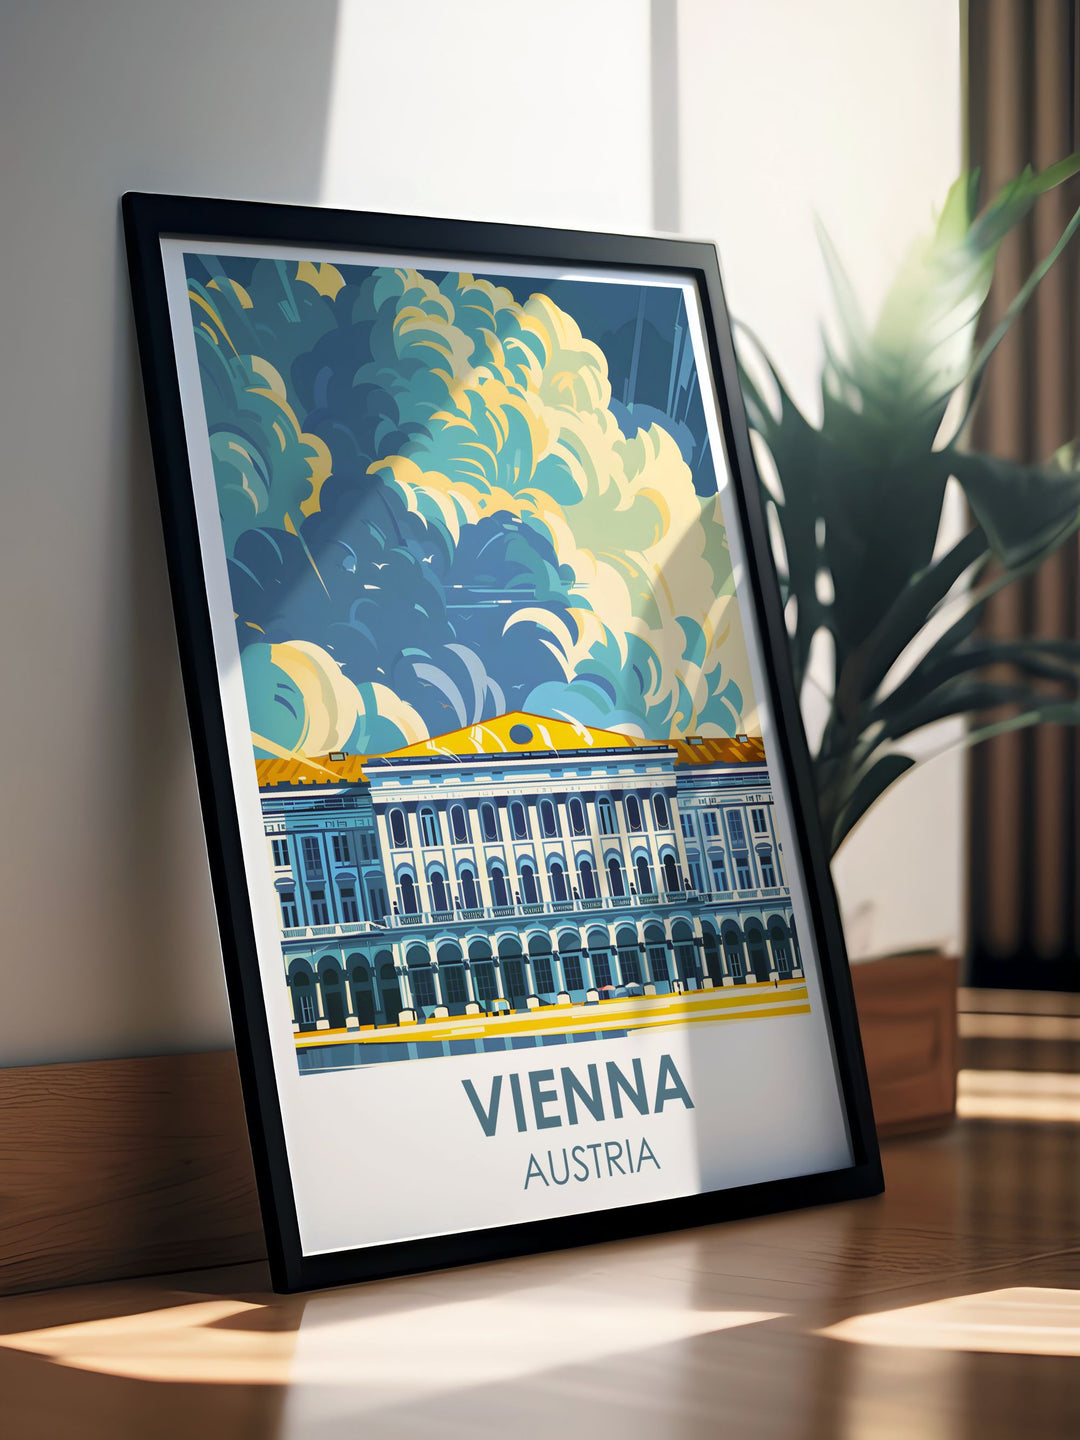 Vienna Wall Art of schonbrunn palace a masterpiece capturing the grandeur of this iconic landmark perfect for enhancing your living space with a touch of European sophistication